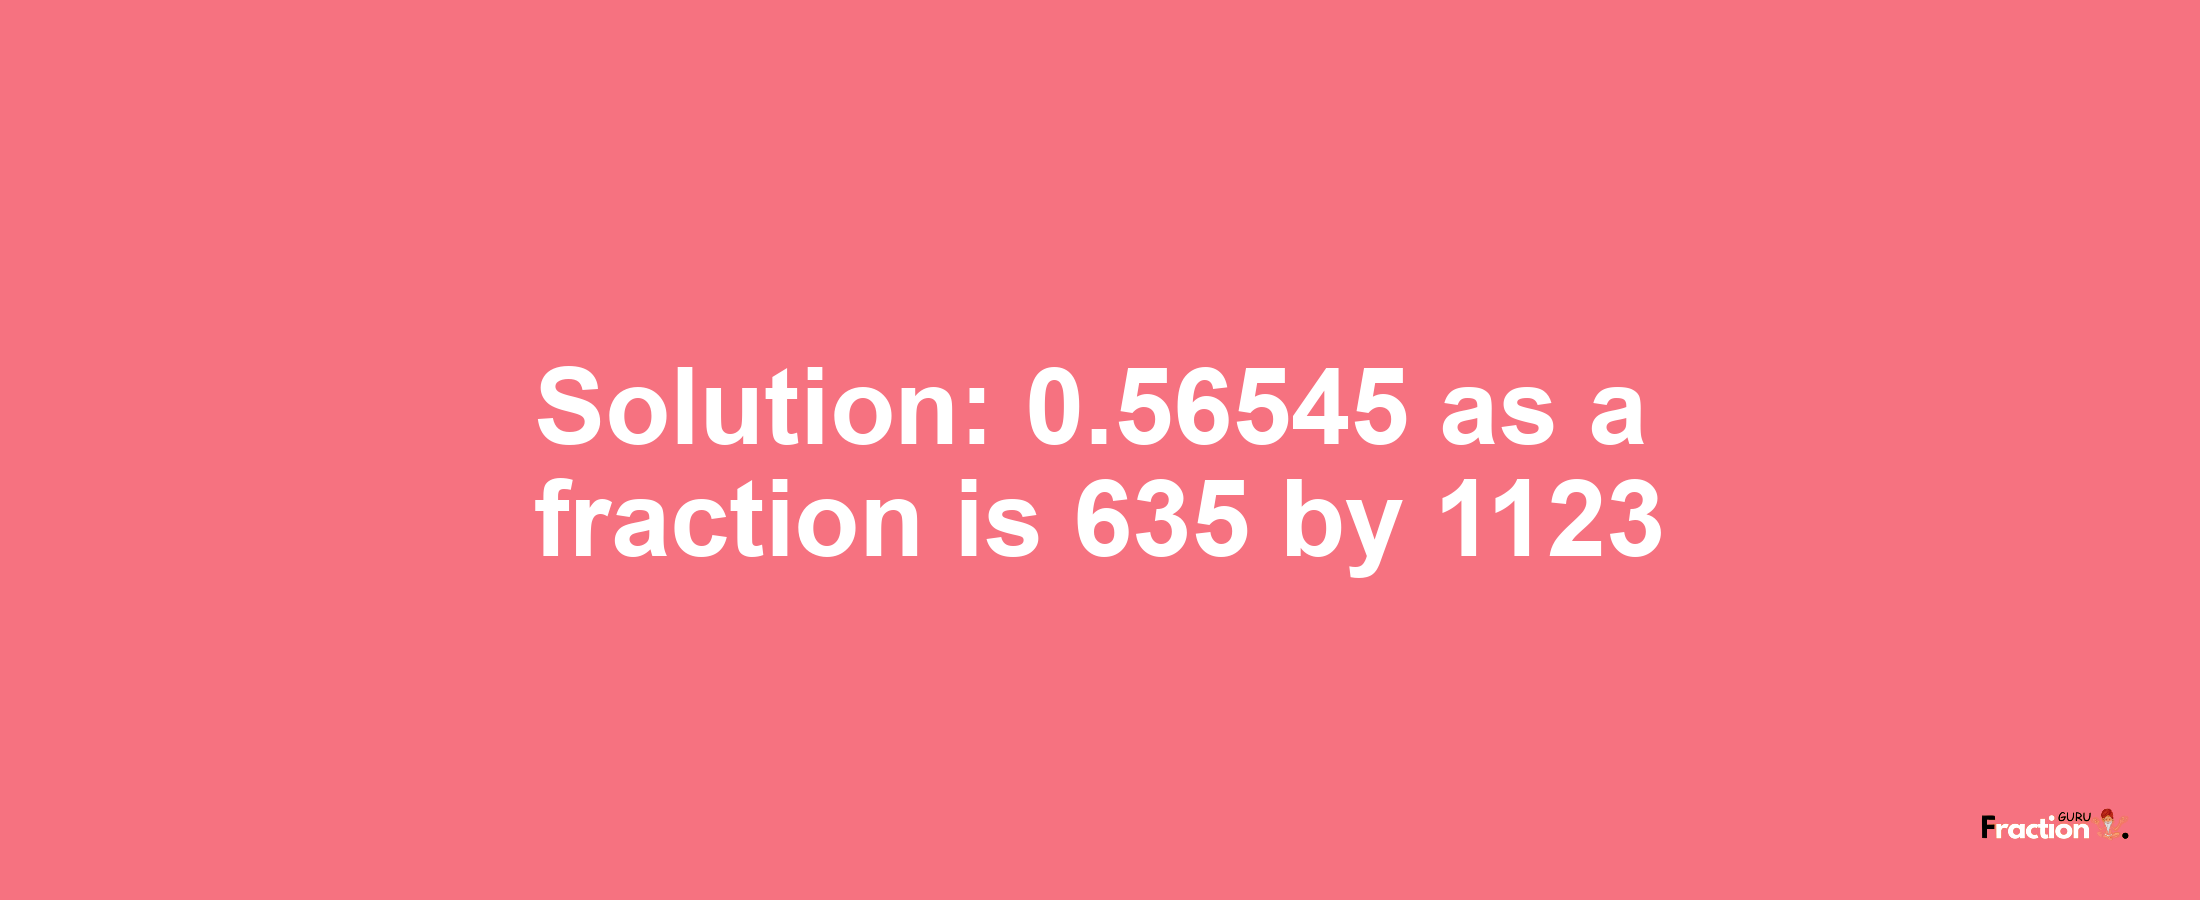 Solution:0.56545 as a fraction is 635/1123